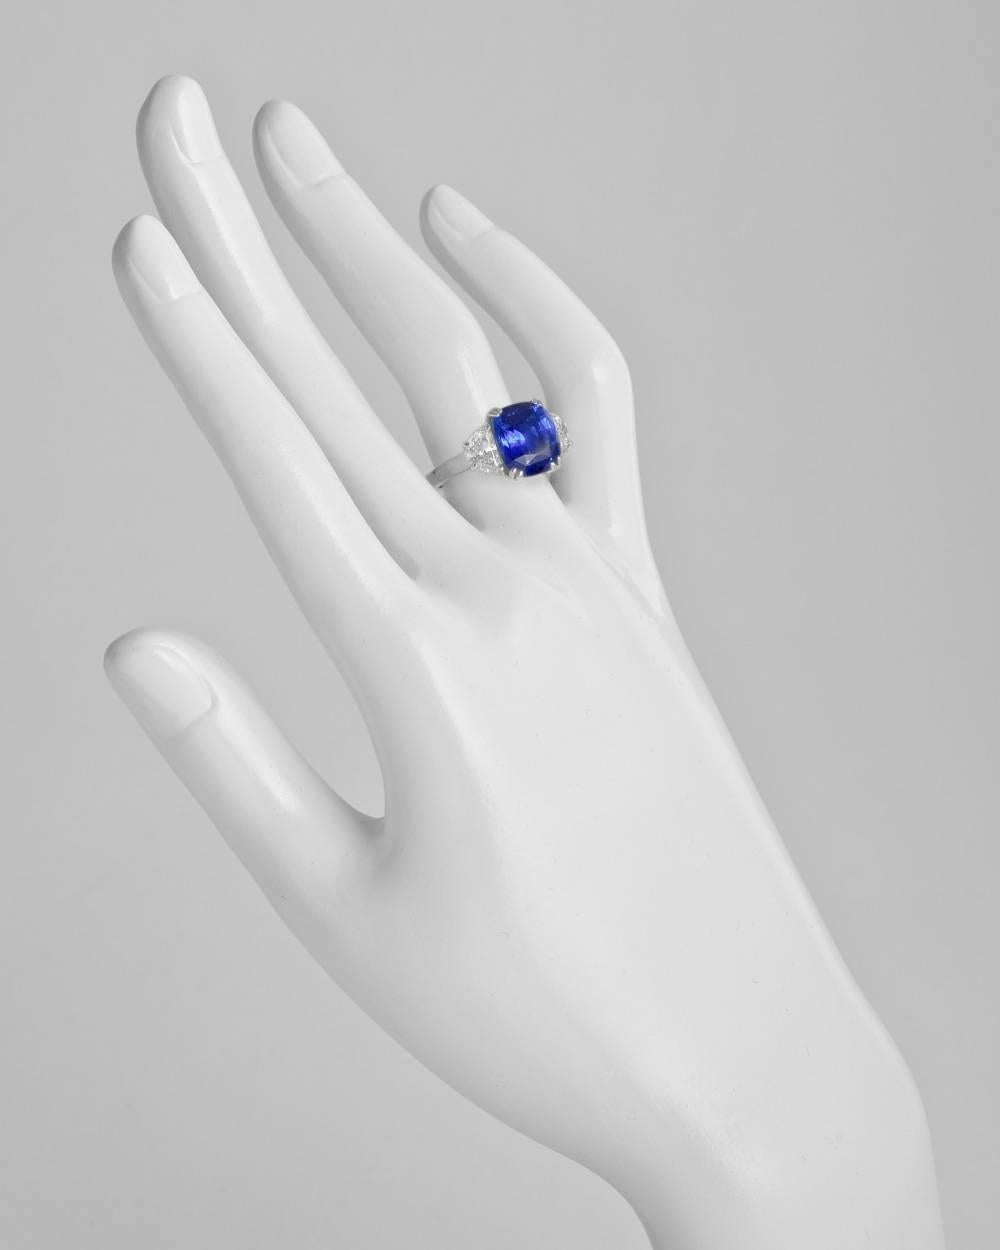 Ceylon sapphire and diamond ring, centering a natural cushion-shaped sapphire weighing 7.66 carats, flanked by two half moon-shaped diamond shoulders weighing approximately 0.90 total carats (H color/VS1-VS2 clarity), mounted in platinum, the